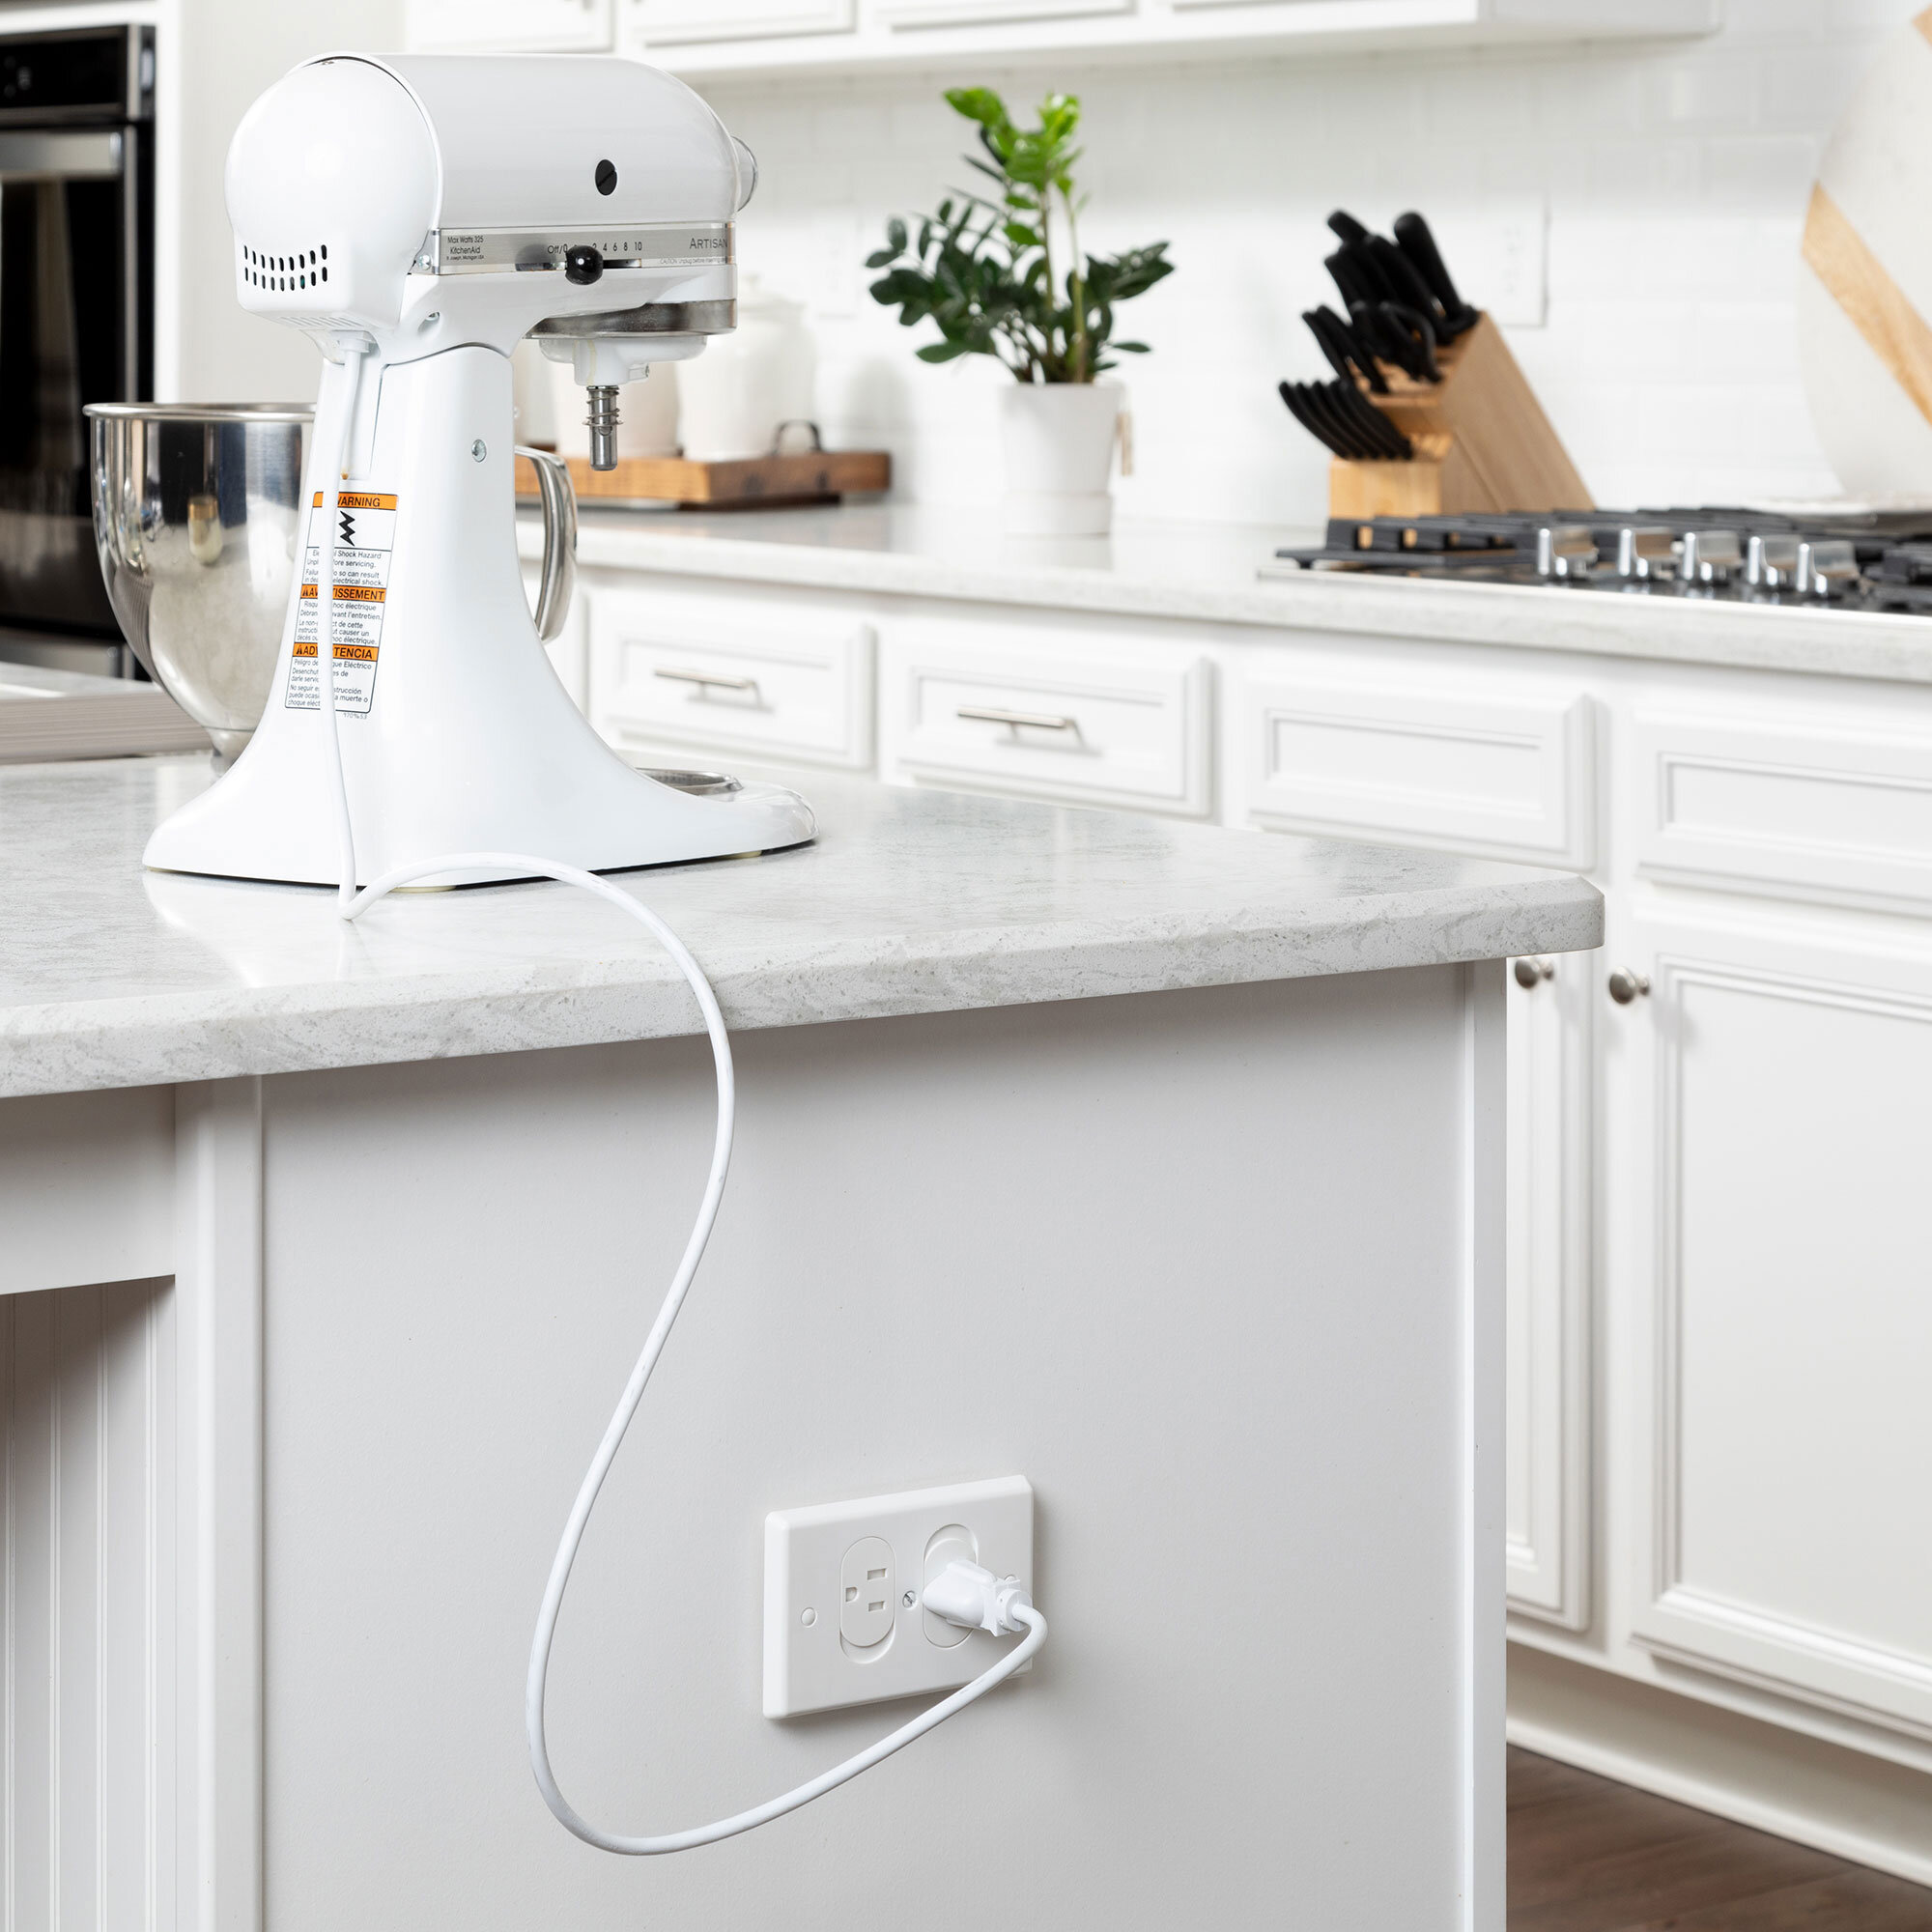 Universal Self-Closing Outlet Cover being used with a mixer in a kitchen